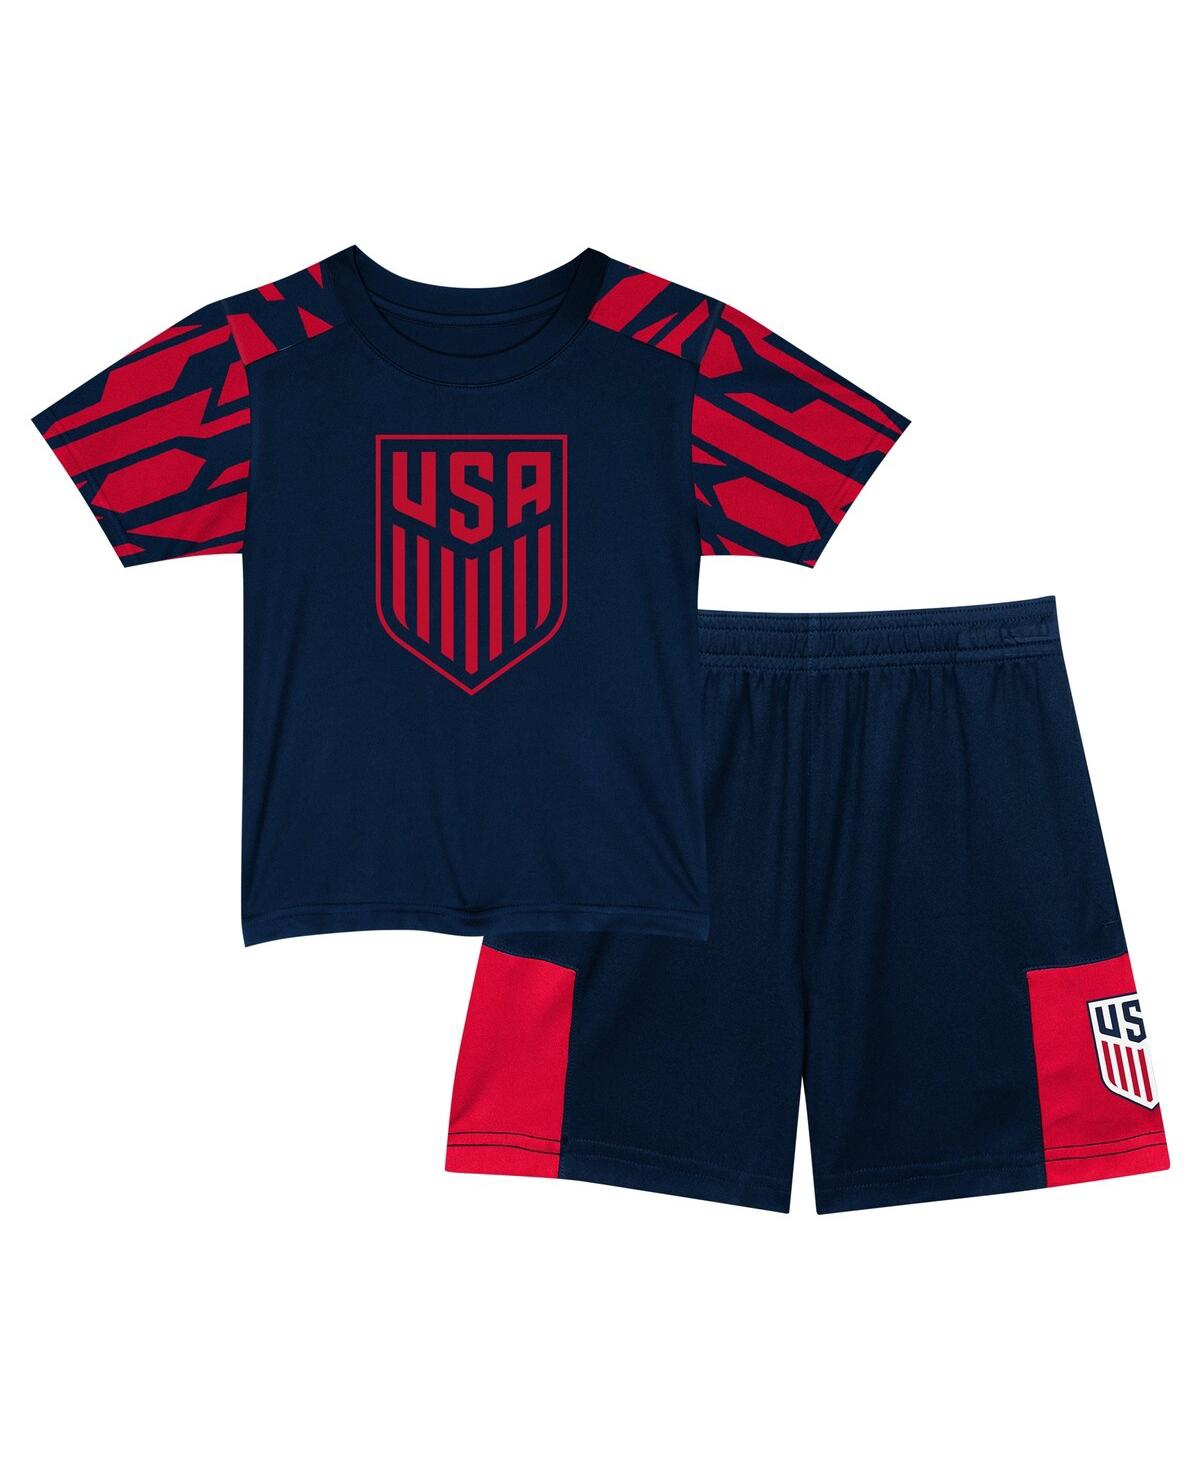 Outerstuff Babies' Toddler Boys And Girls Navy Usmnt Victory Pass T-shirt And Shorts Set